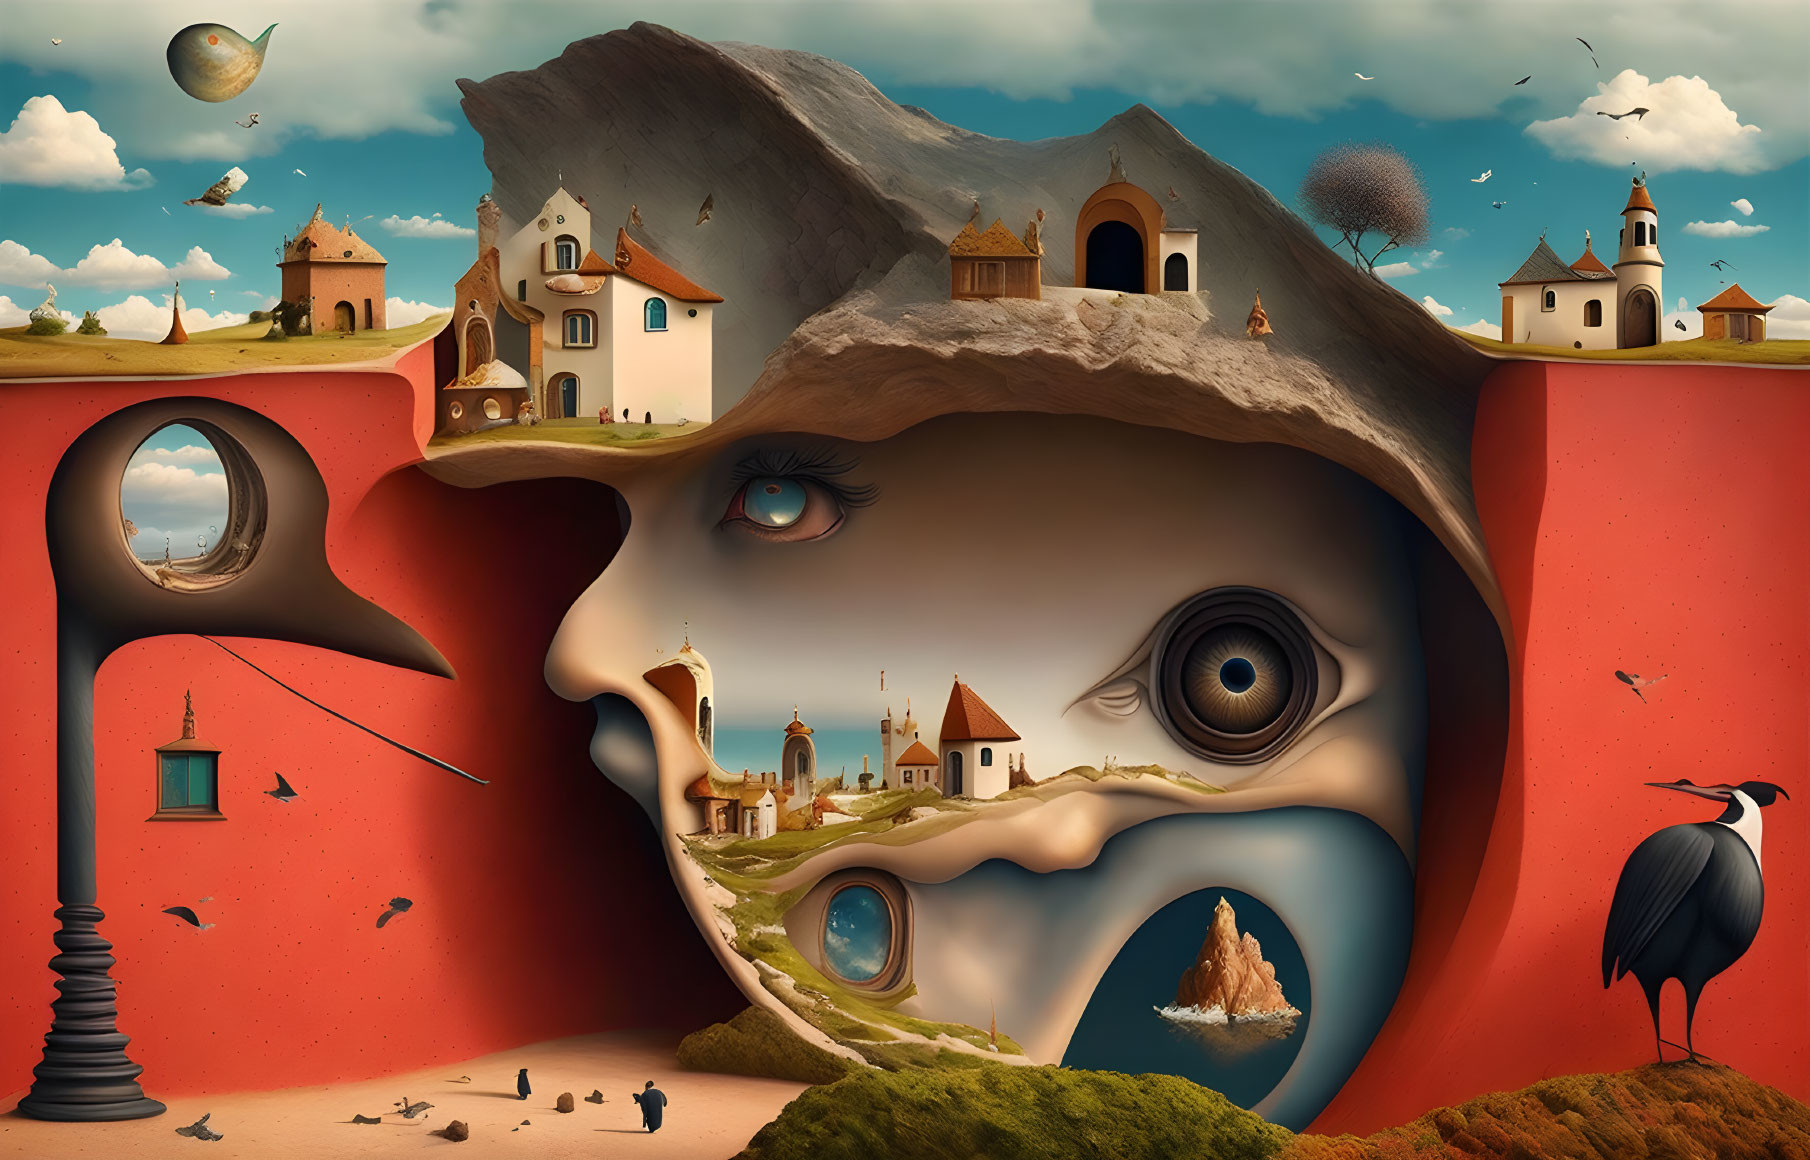 Surreal landscape with giant face, town windows, stork, and floating elements